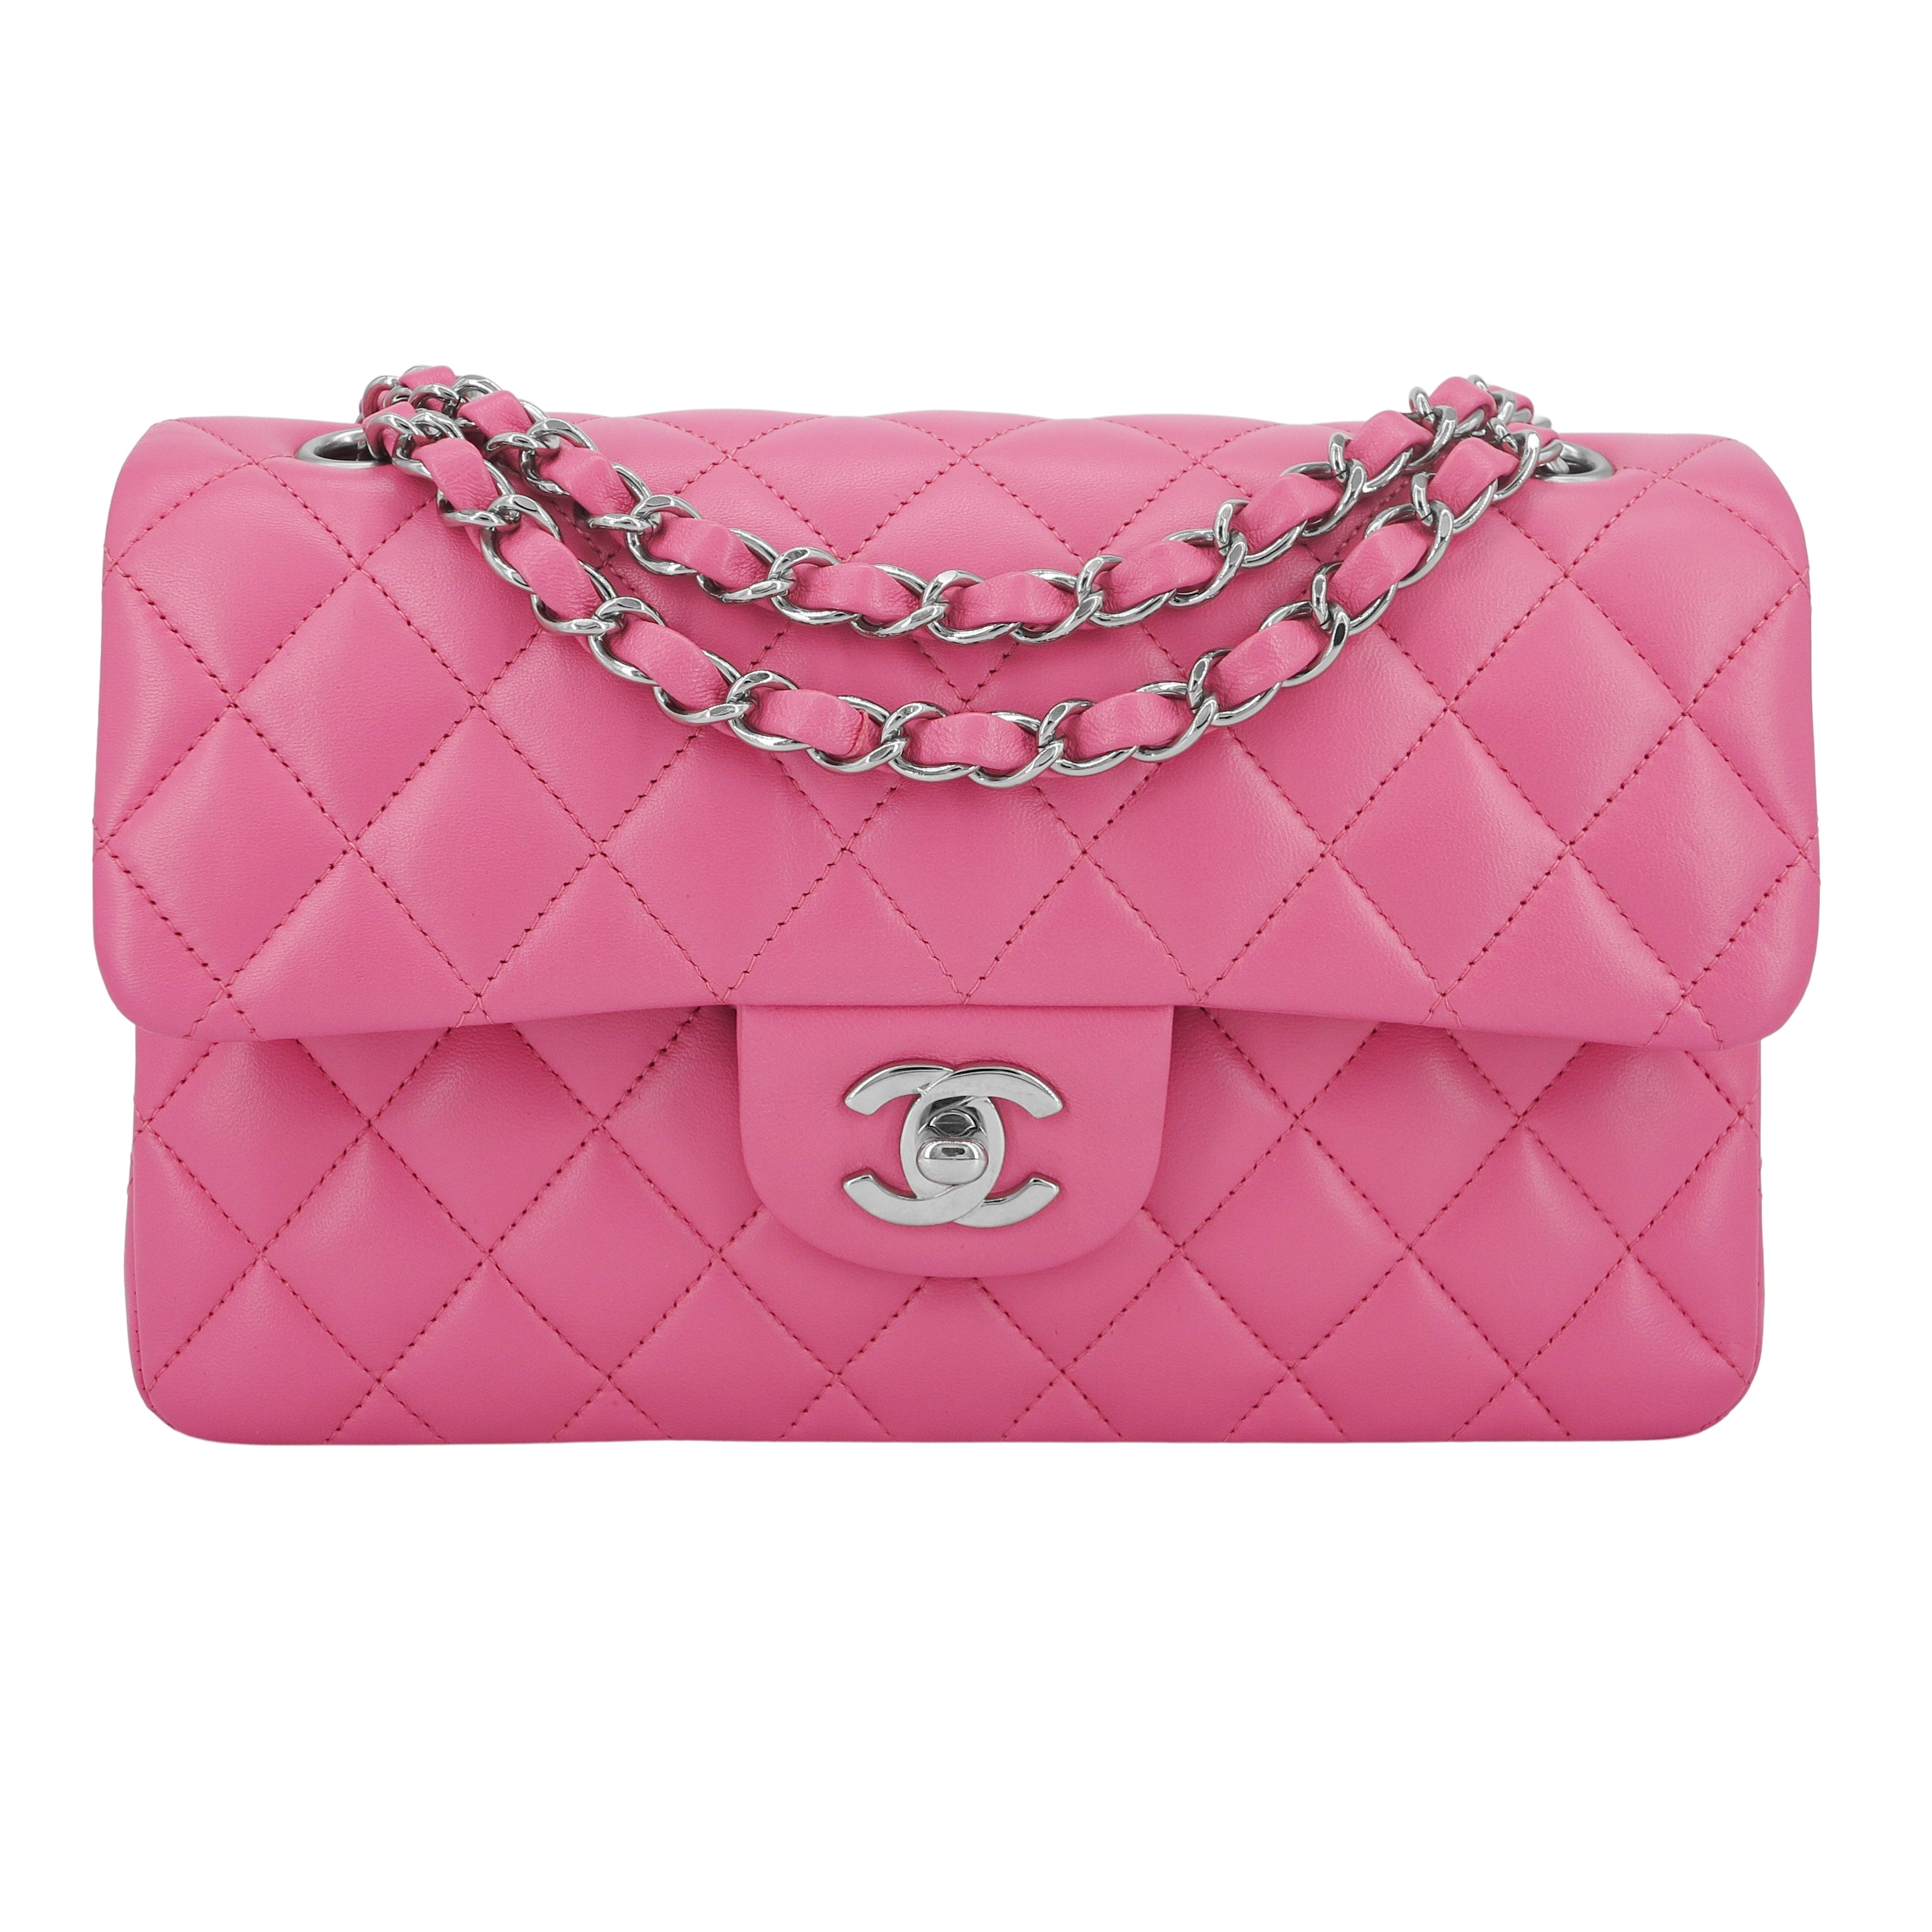 CHANEL | Dearluxe - Authentic Luxury Bags & Accessories